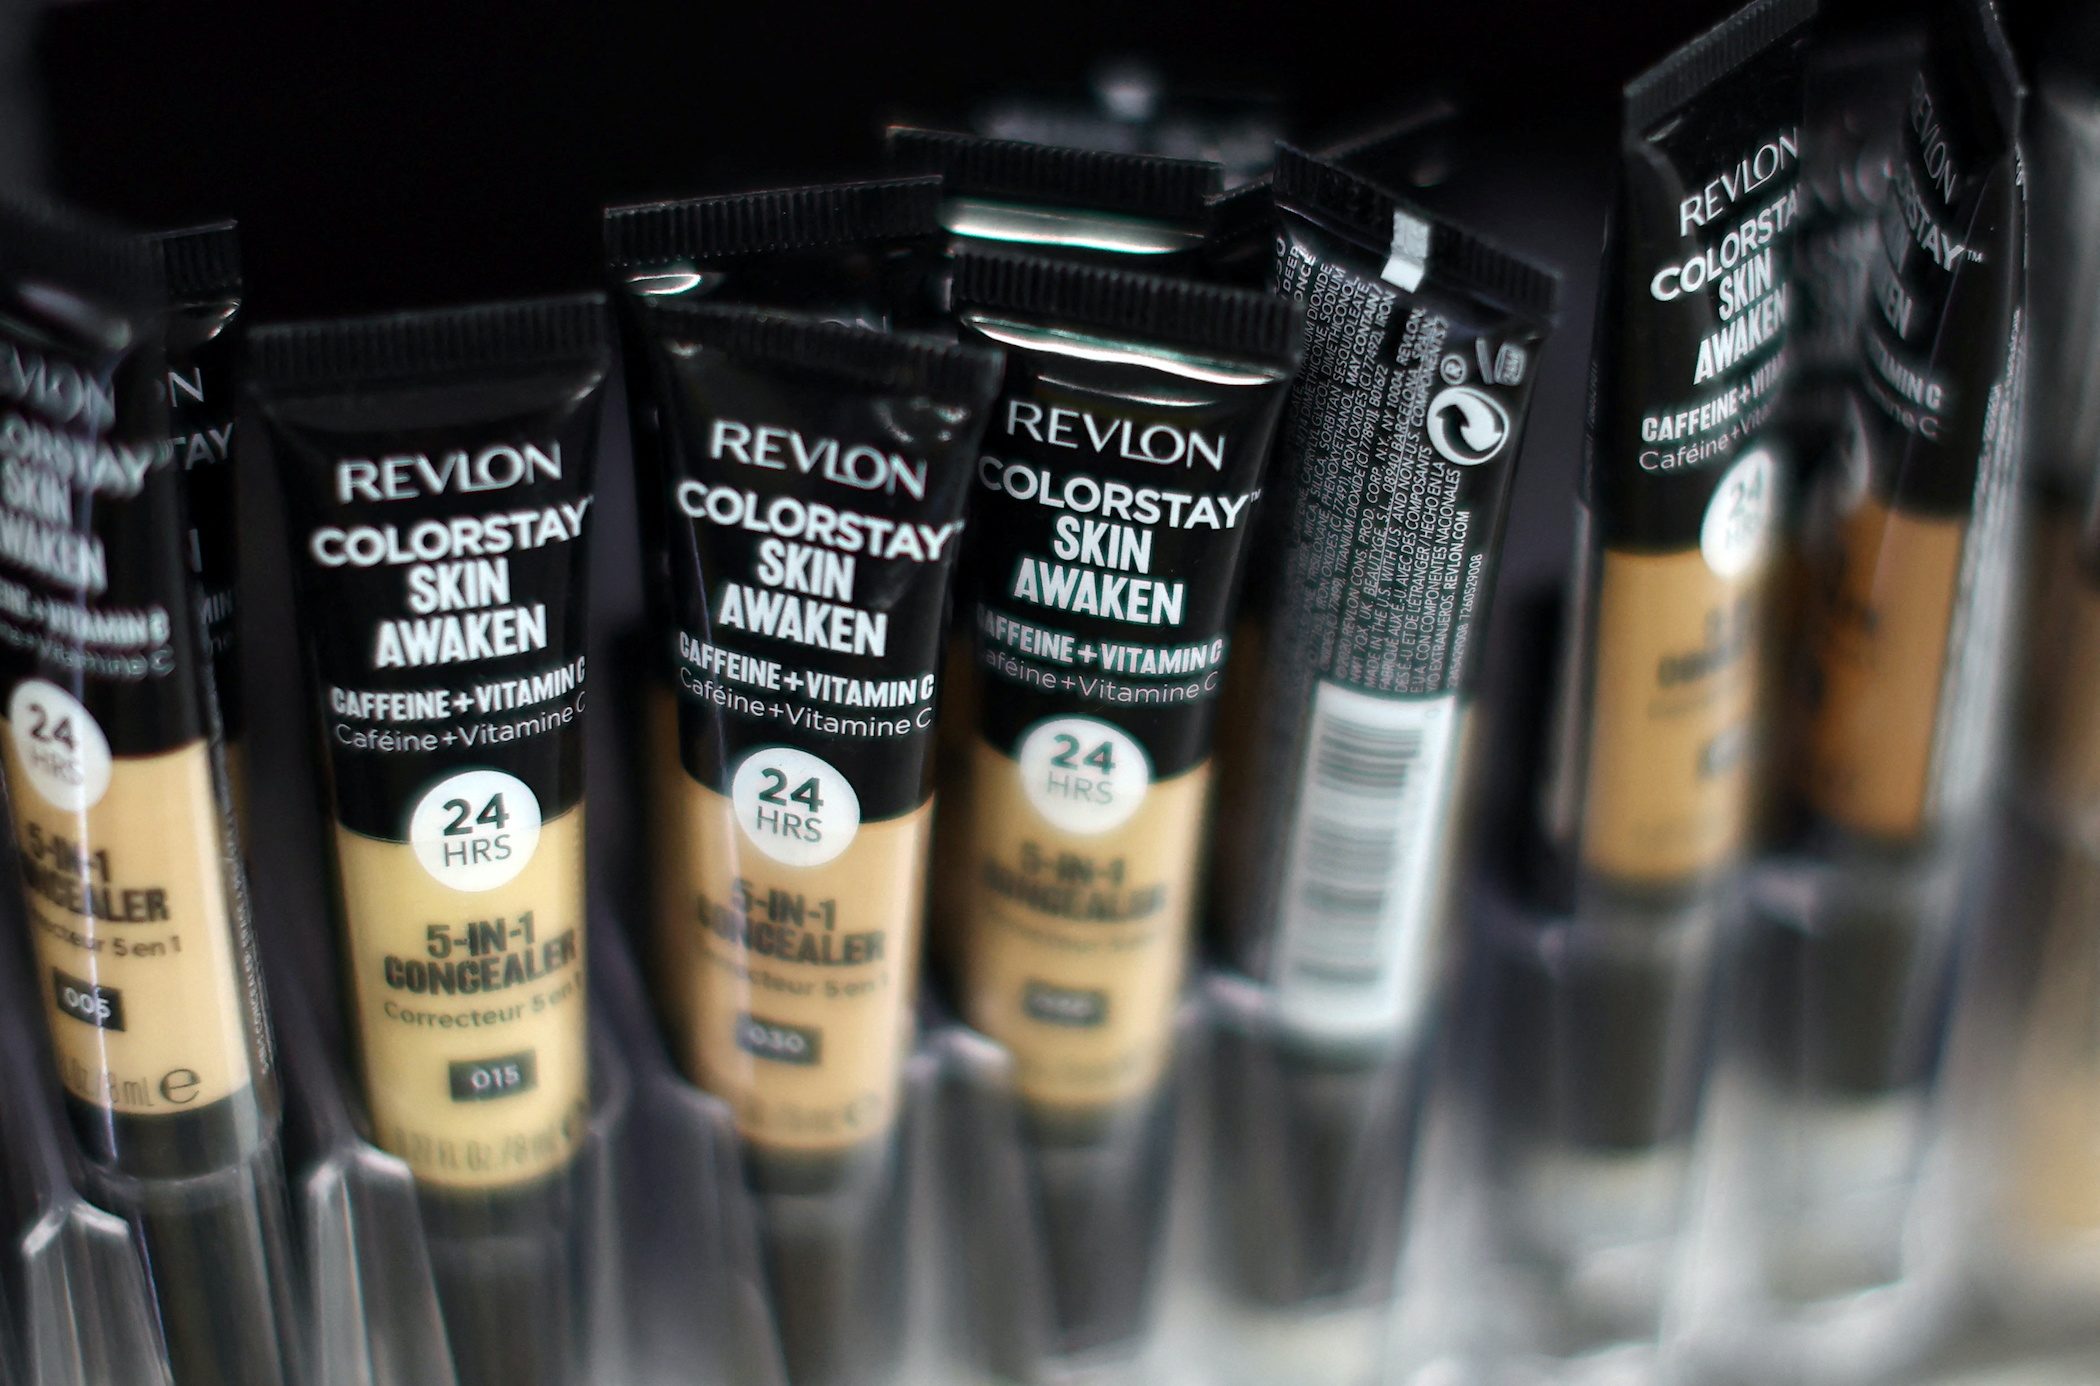 Revlon borrows $375 million in bankruptcy to shore up supply chain